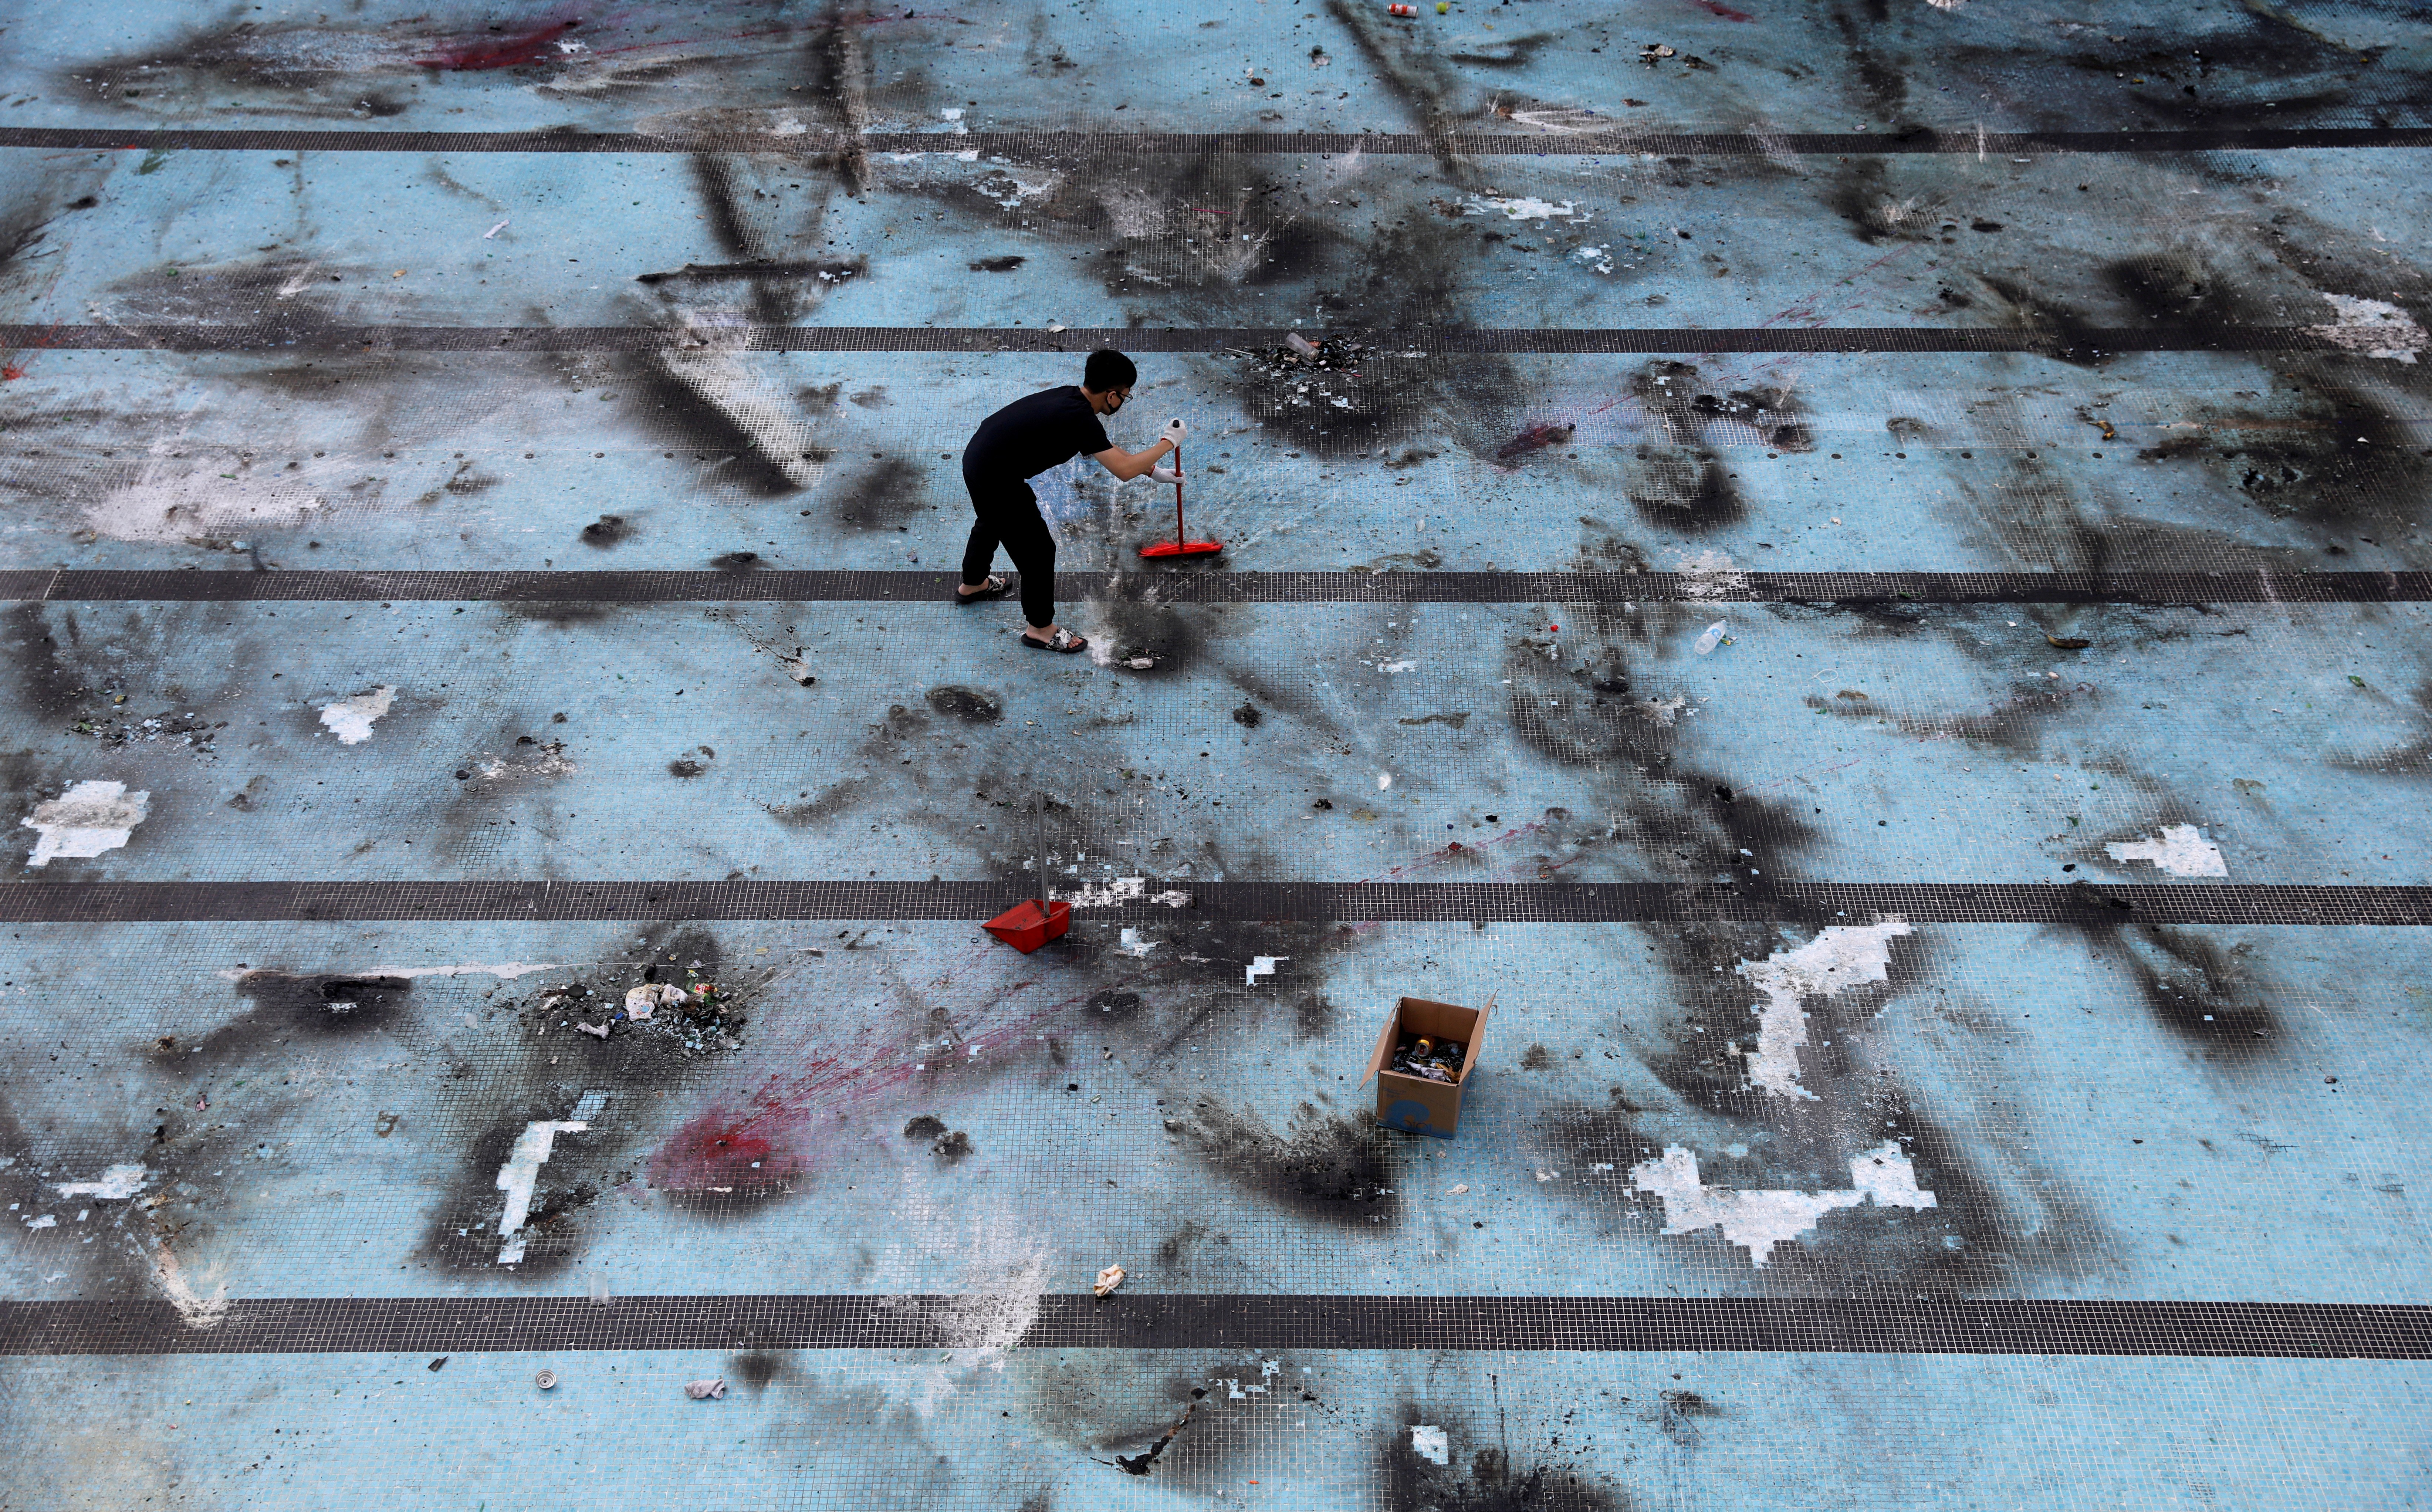 An anti-government protester cleans up after protests at Polytechnic University in Hong Kong on November 16, 2019. Photo: Reuters